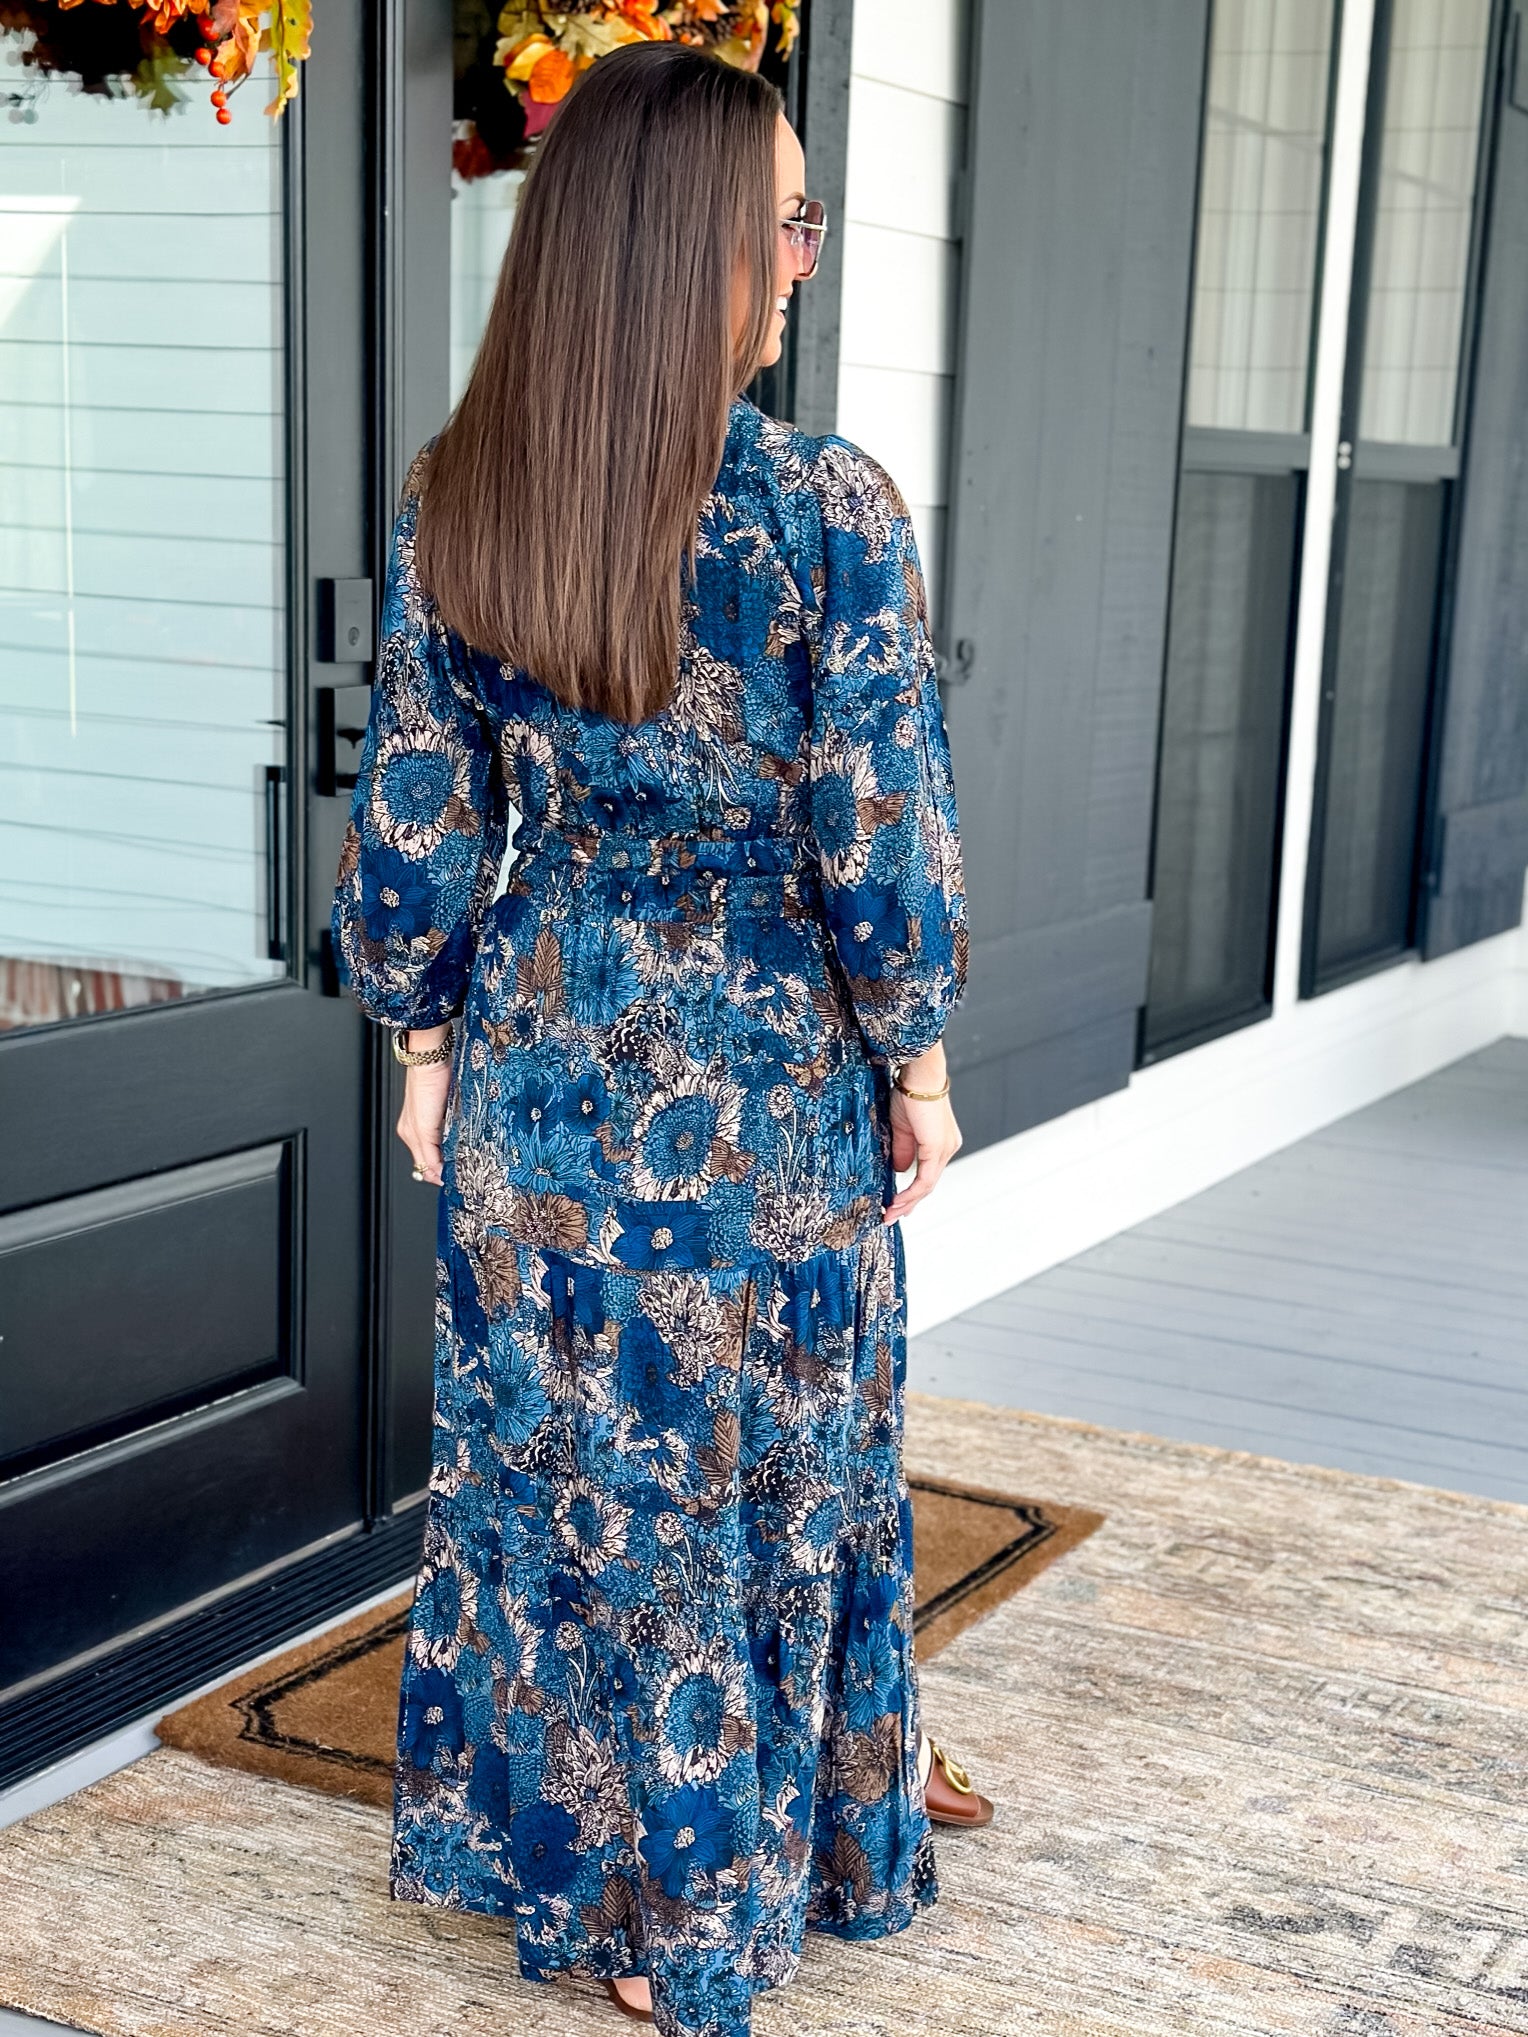 Shades Of Blue Floral Dress